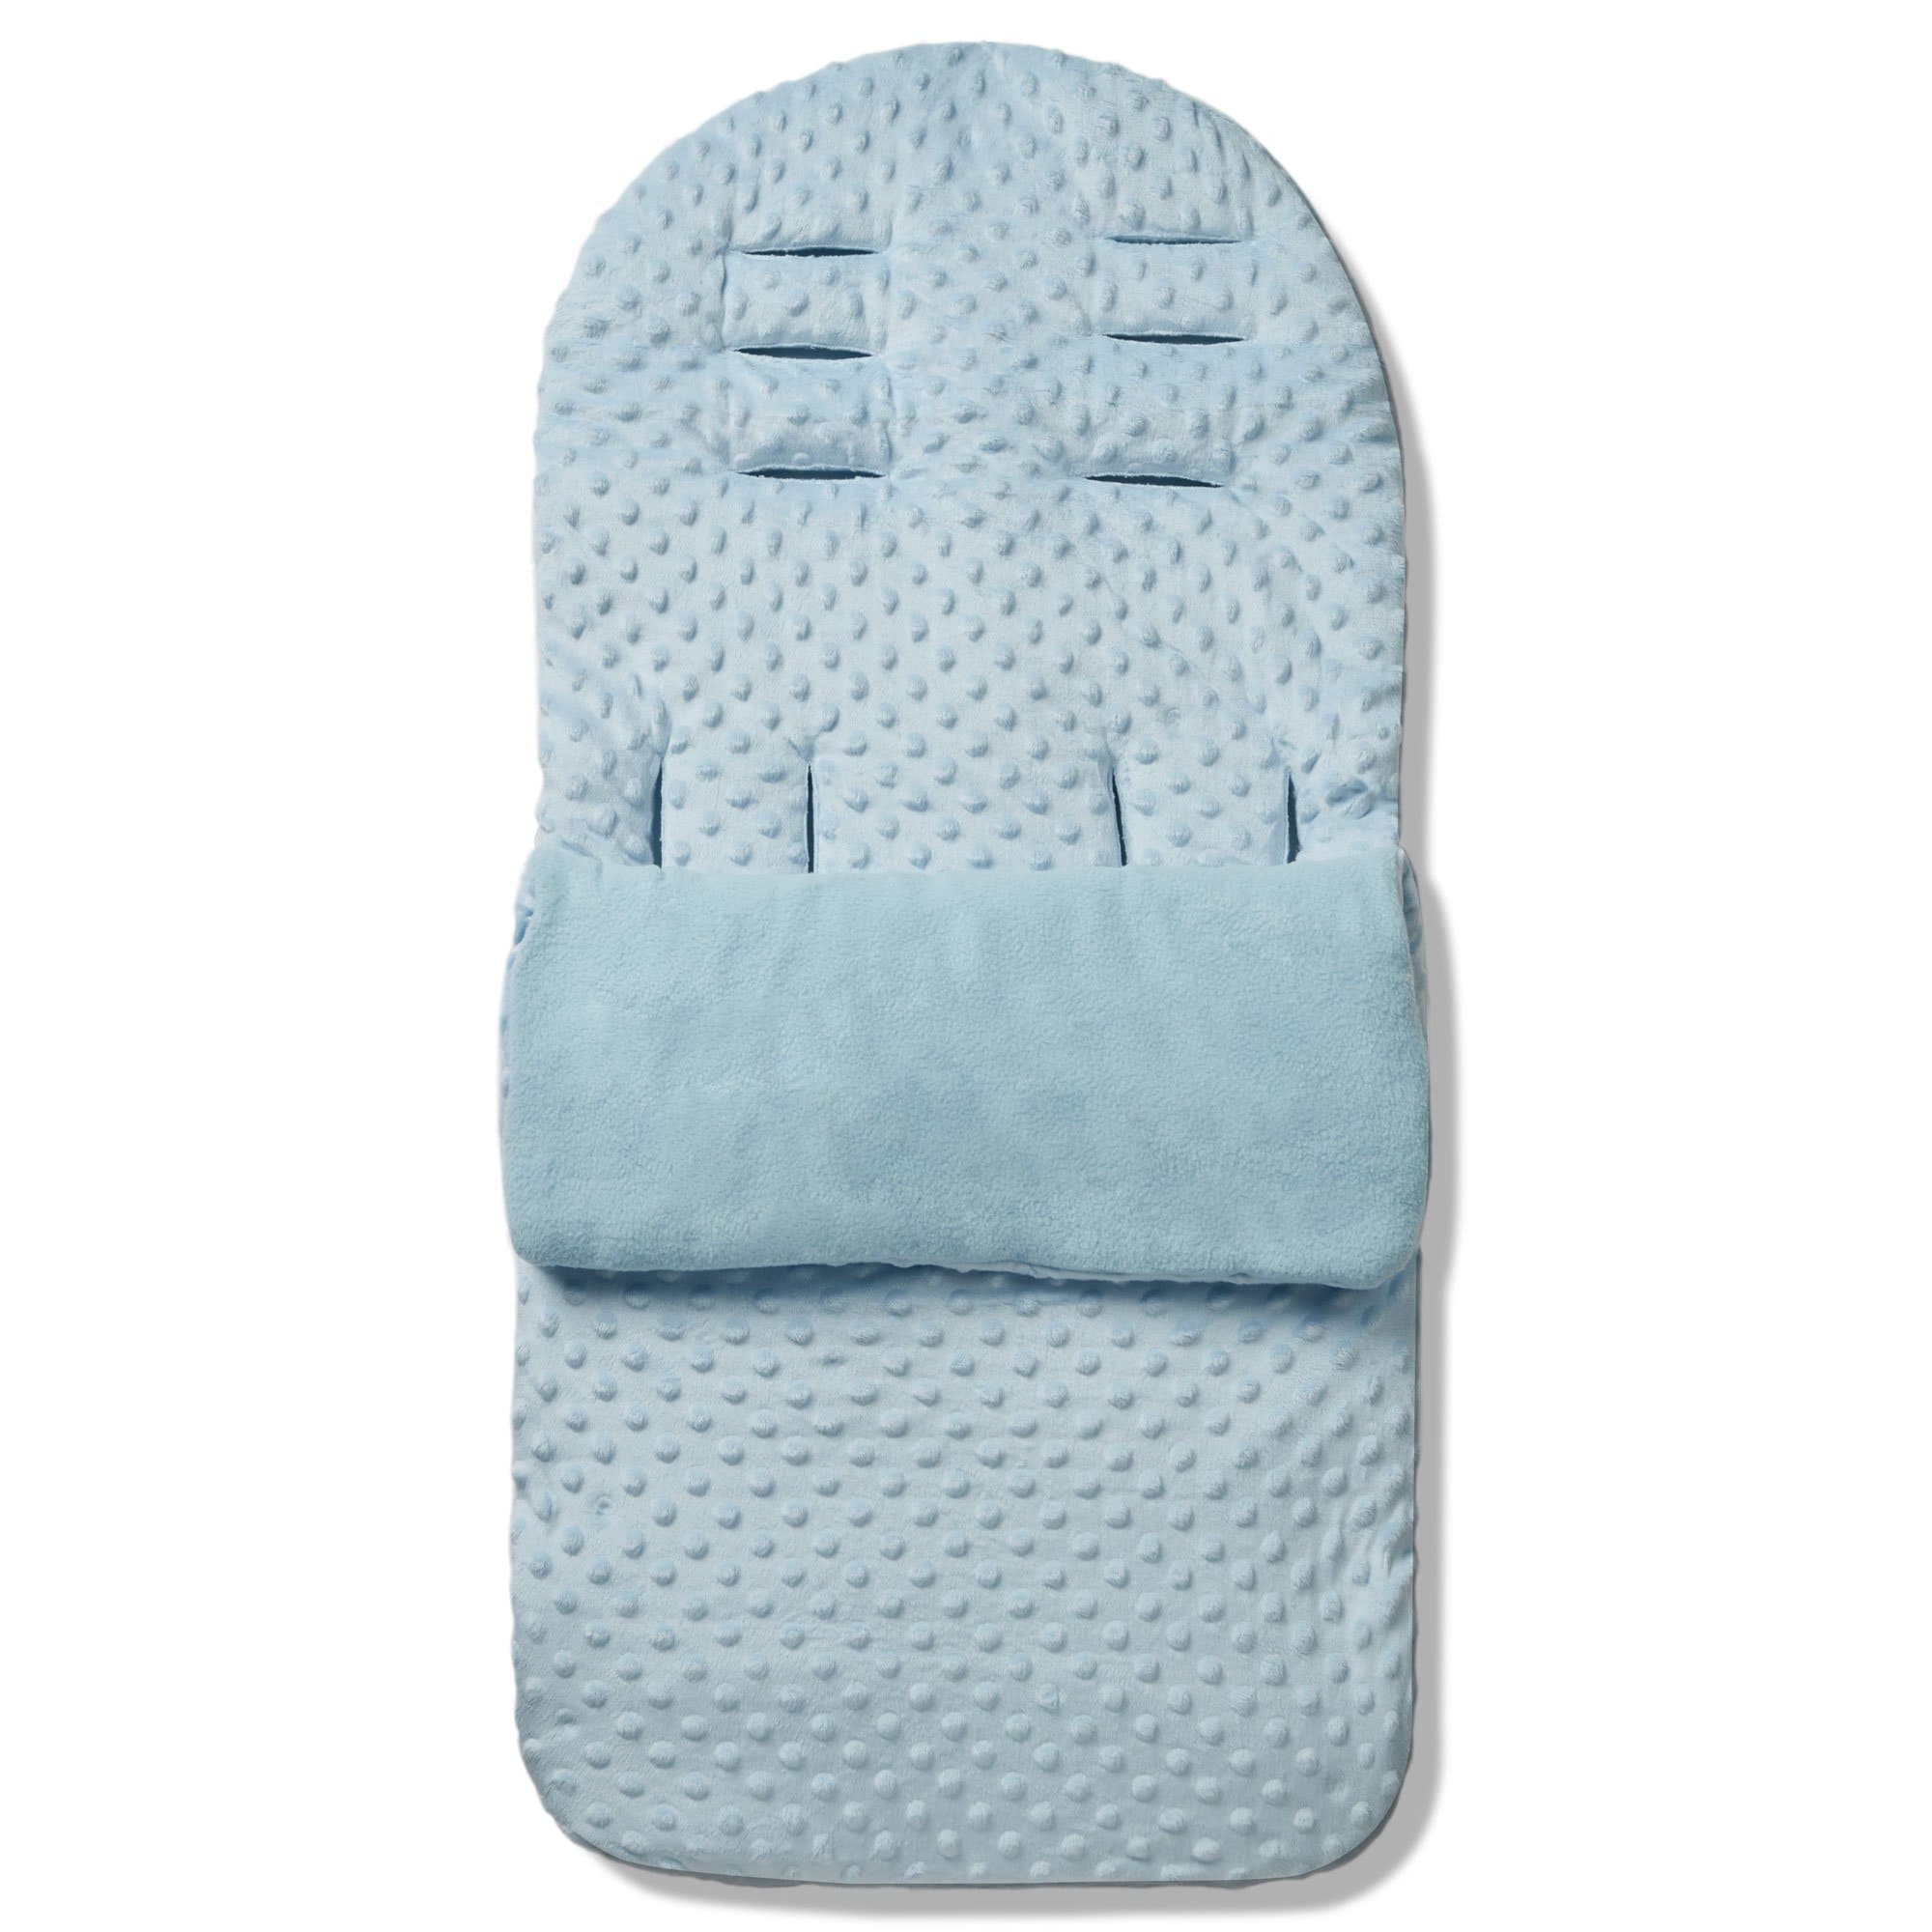 Dimple Footmuff / Cosy Toes Compatible with My Babiie - Blue / Fits All Models | For Your Little One